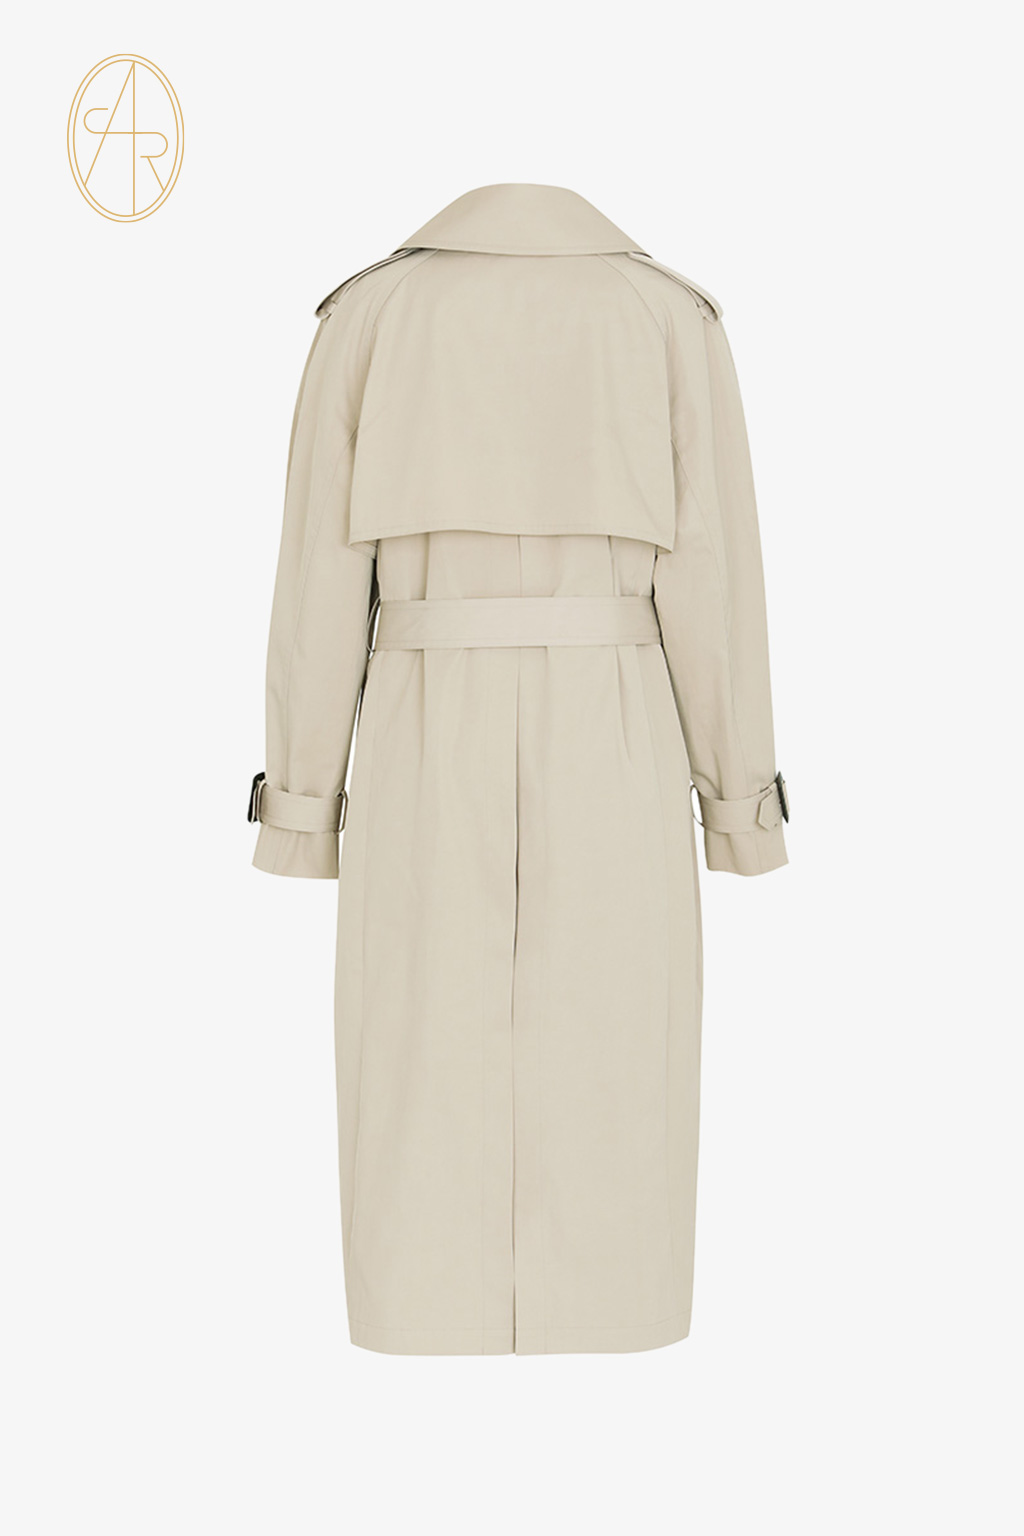 [SALE] The trench coat